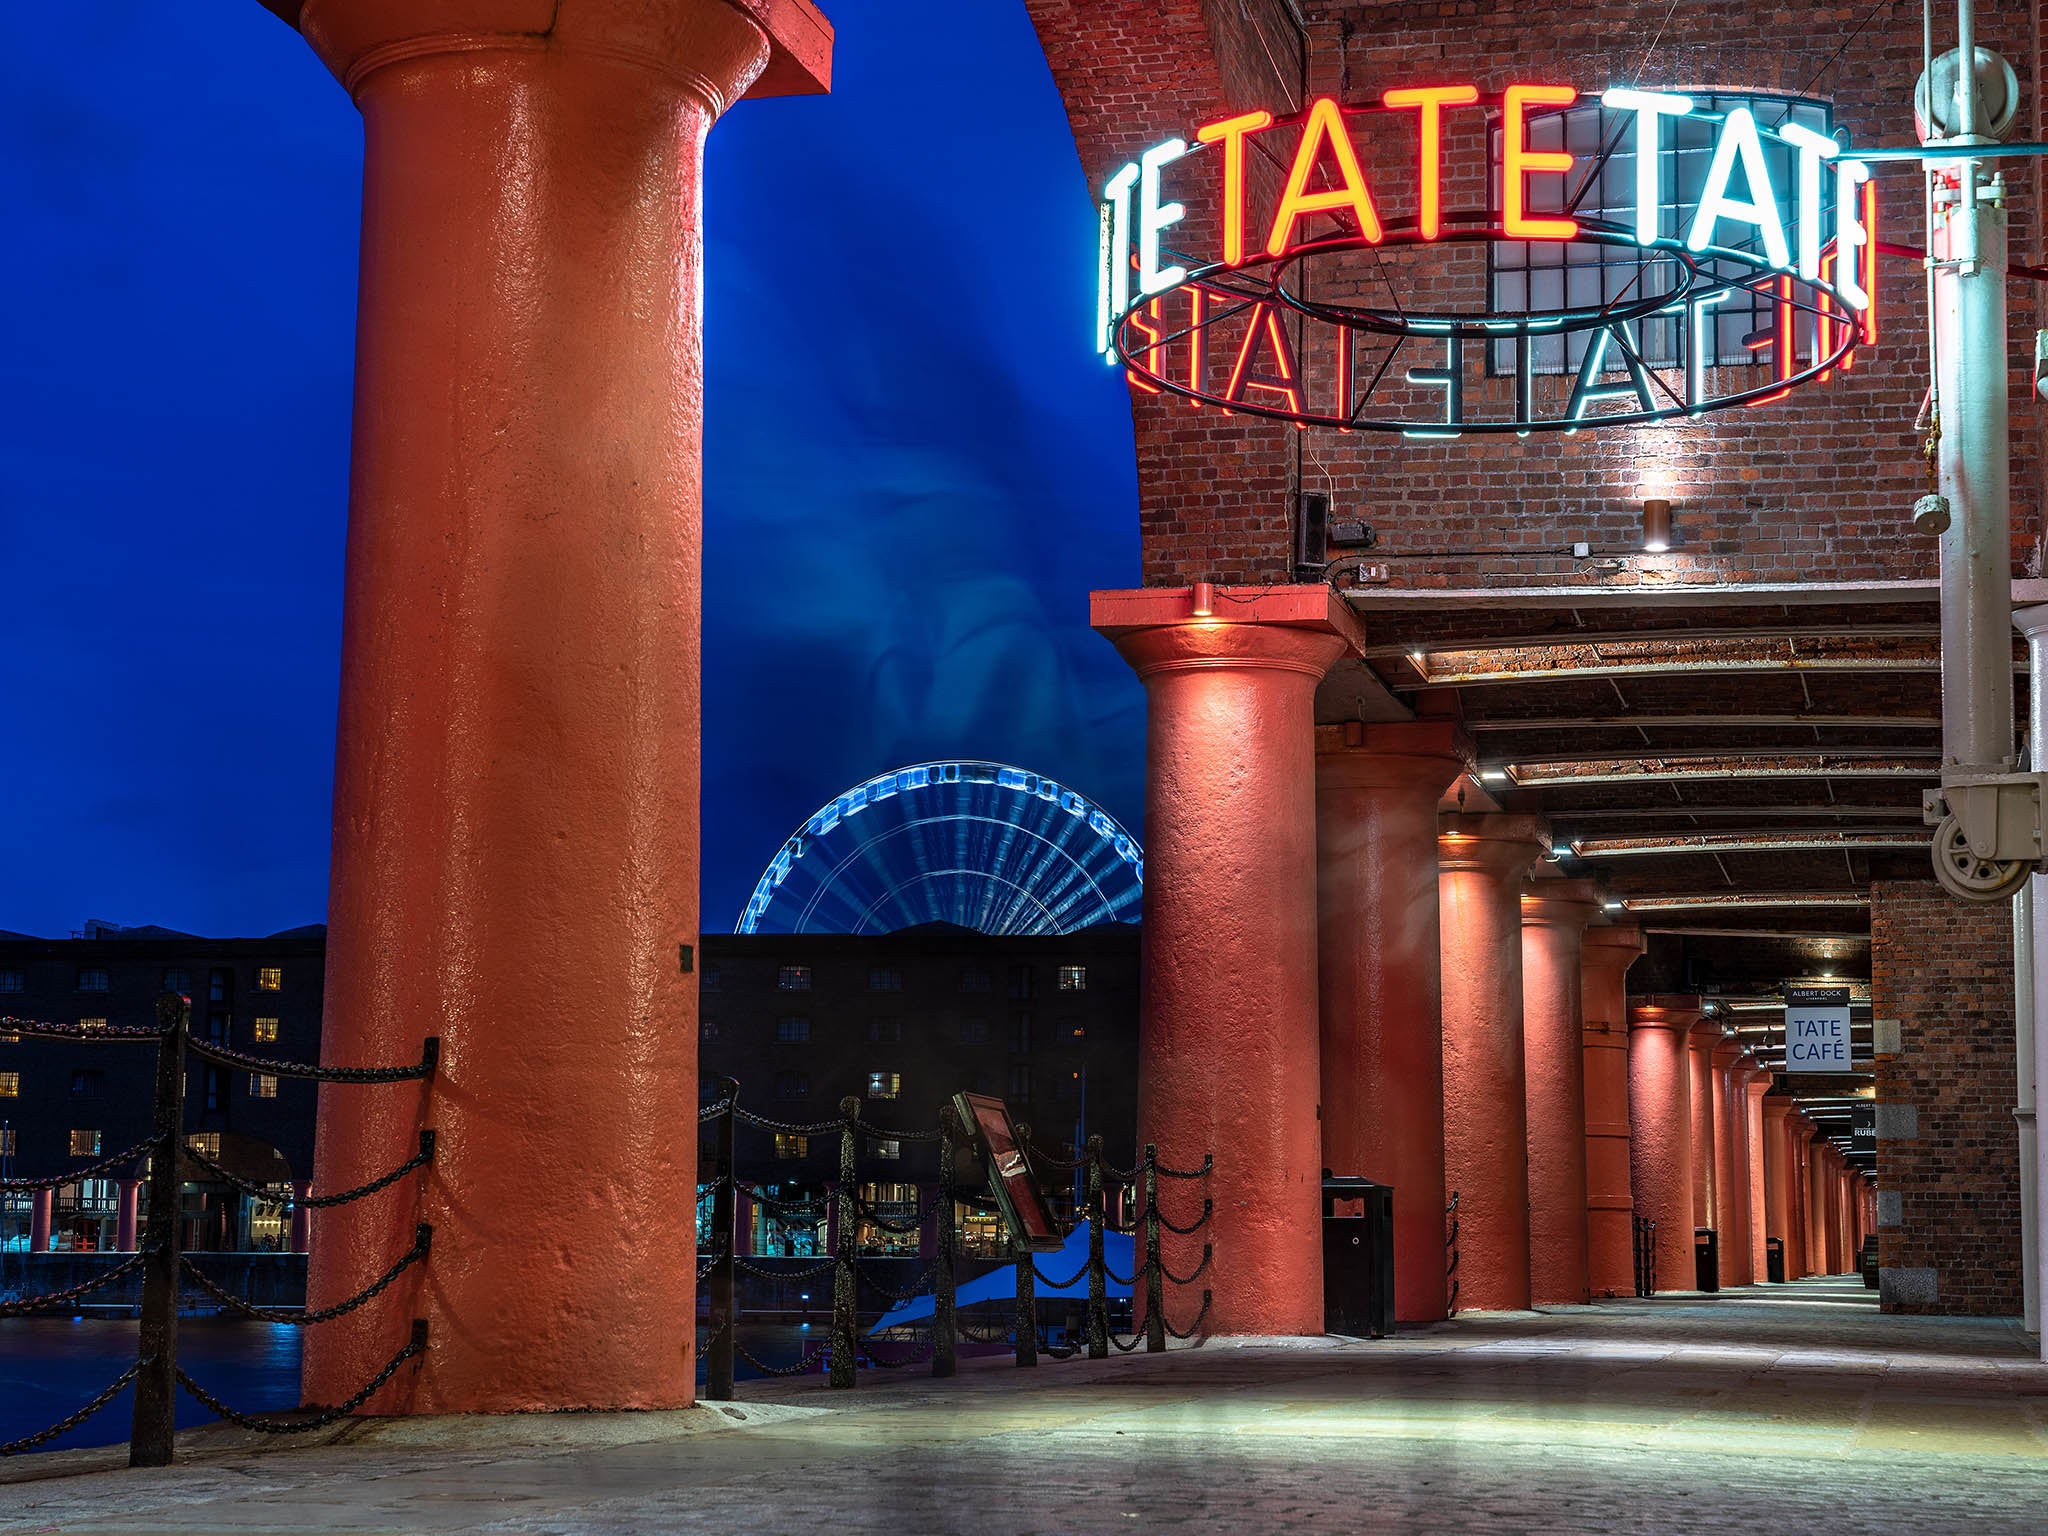 The Royal Albert Dock has been regenerated, has a Tate museum and lots of great restaurants